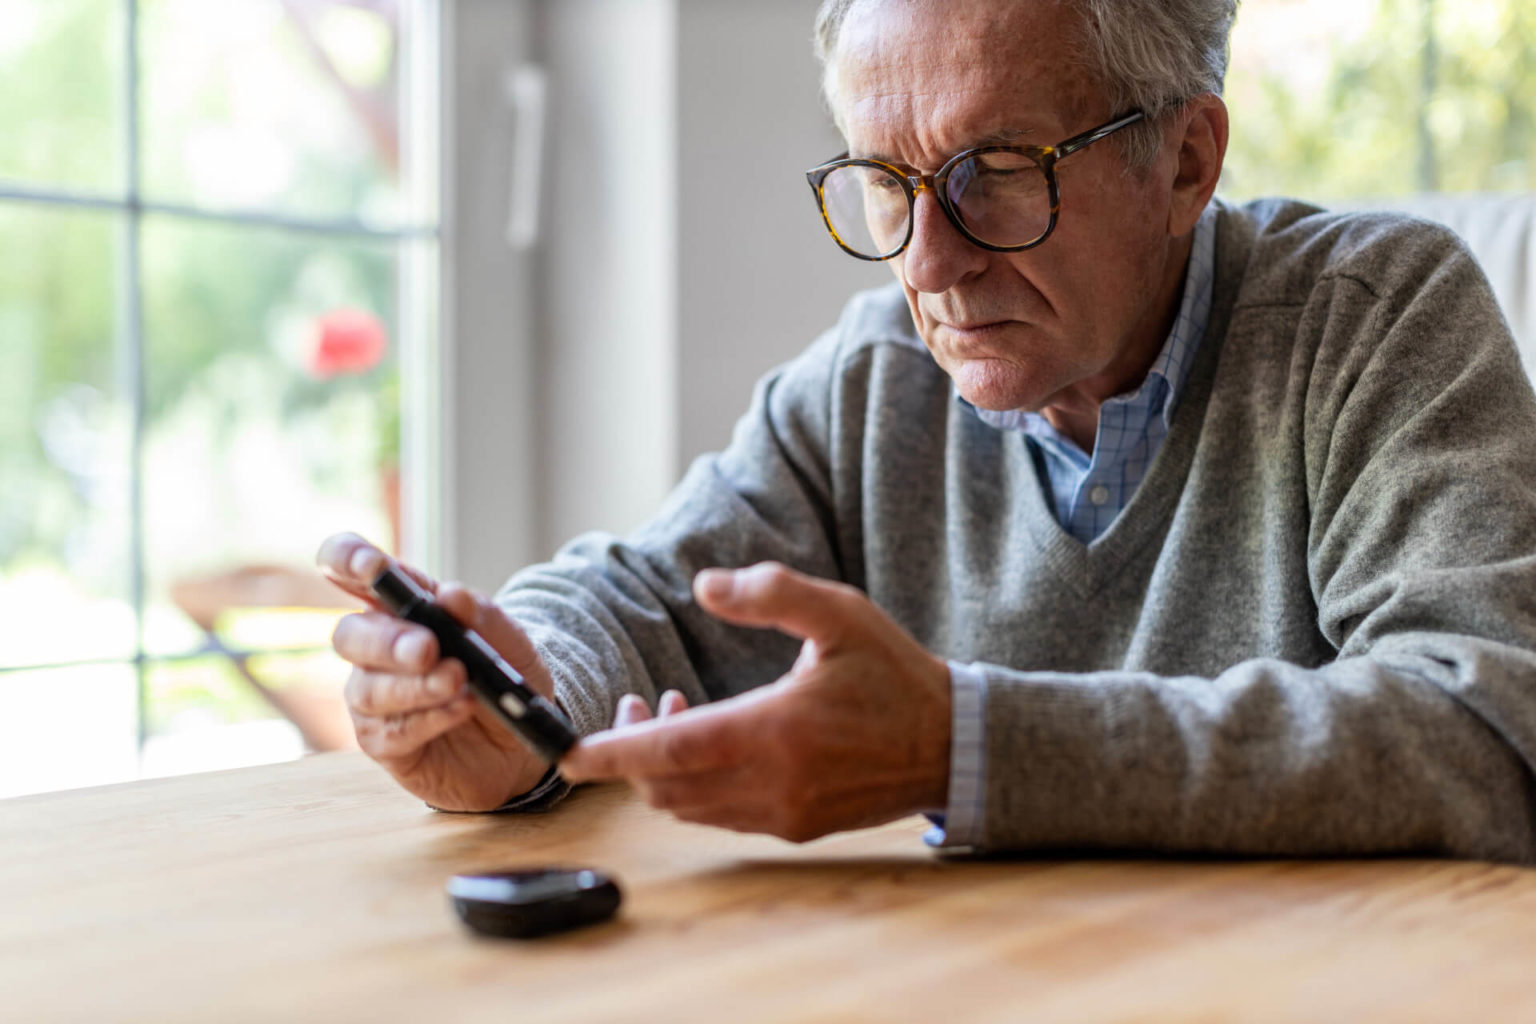 Older man with glasses sitting at a table and checking his blood sugar.